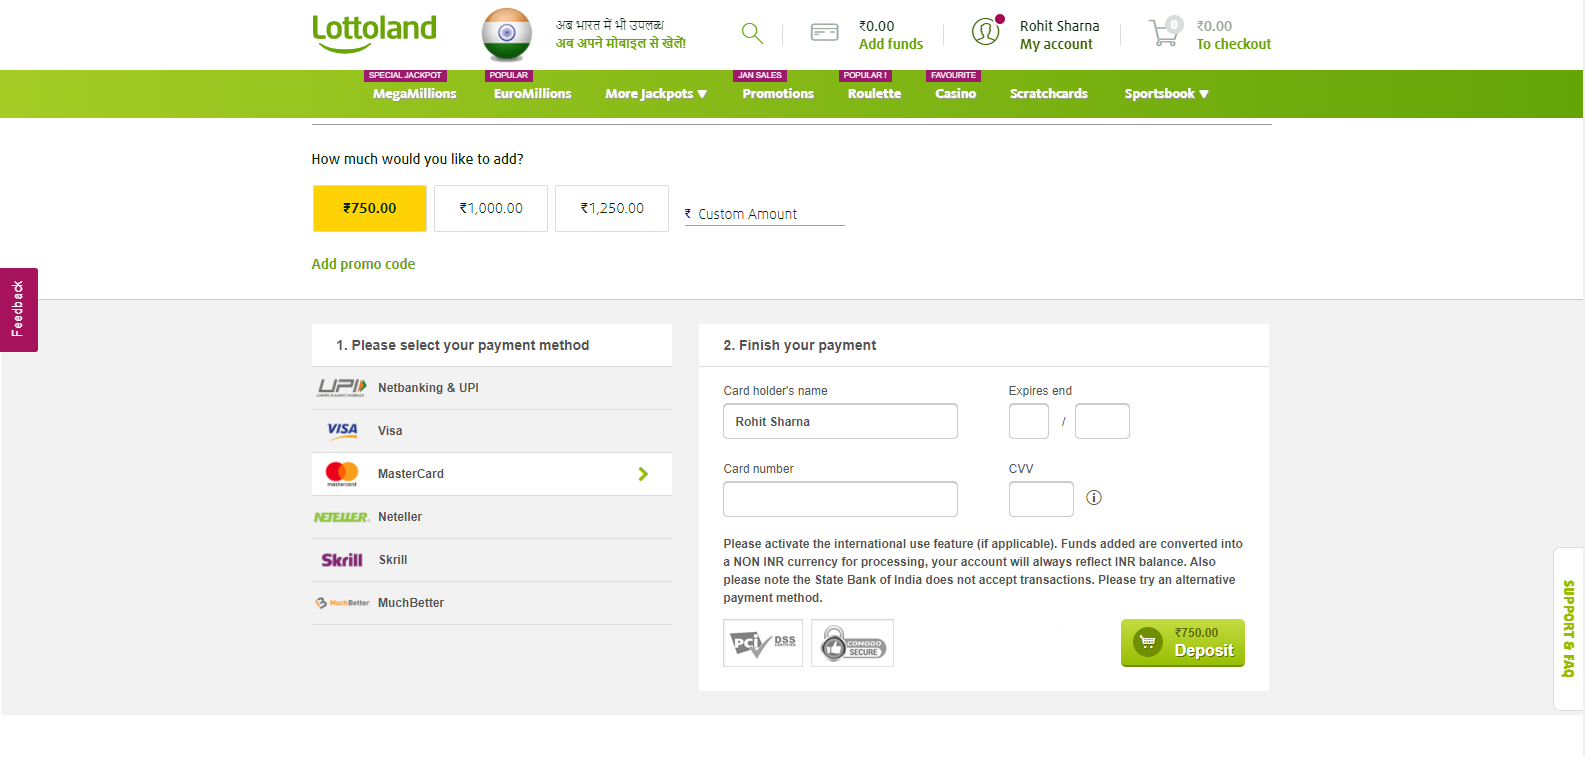 Step 3: Now select your payment method, see the picture.